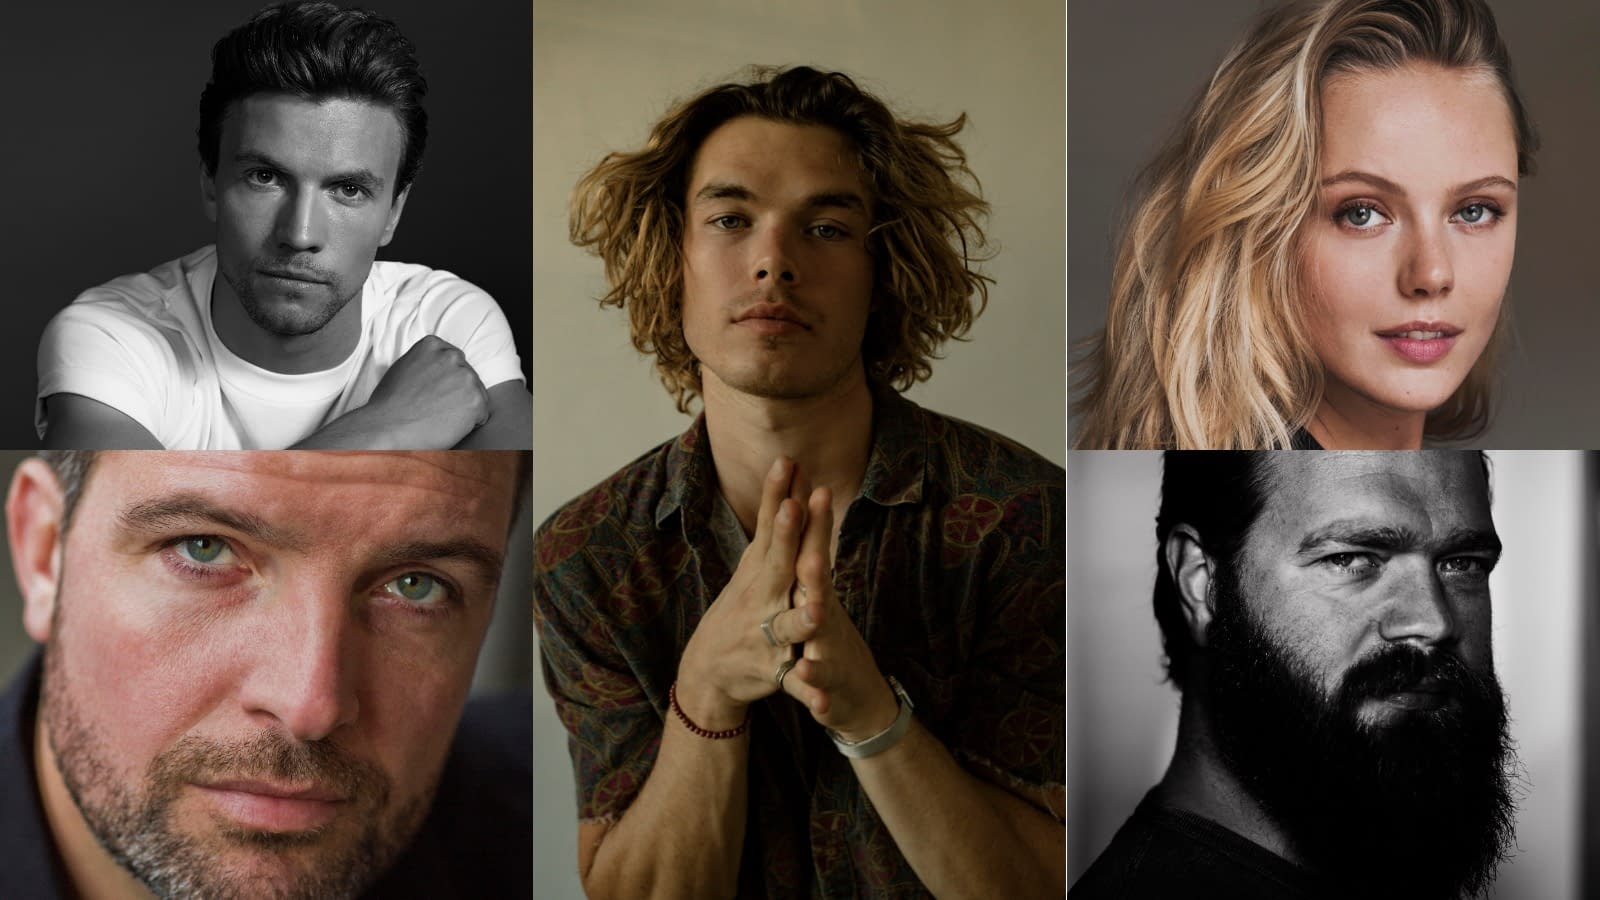 Vikings Valhalla Cast - Who's Starring in the Vikings Spinoff?